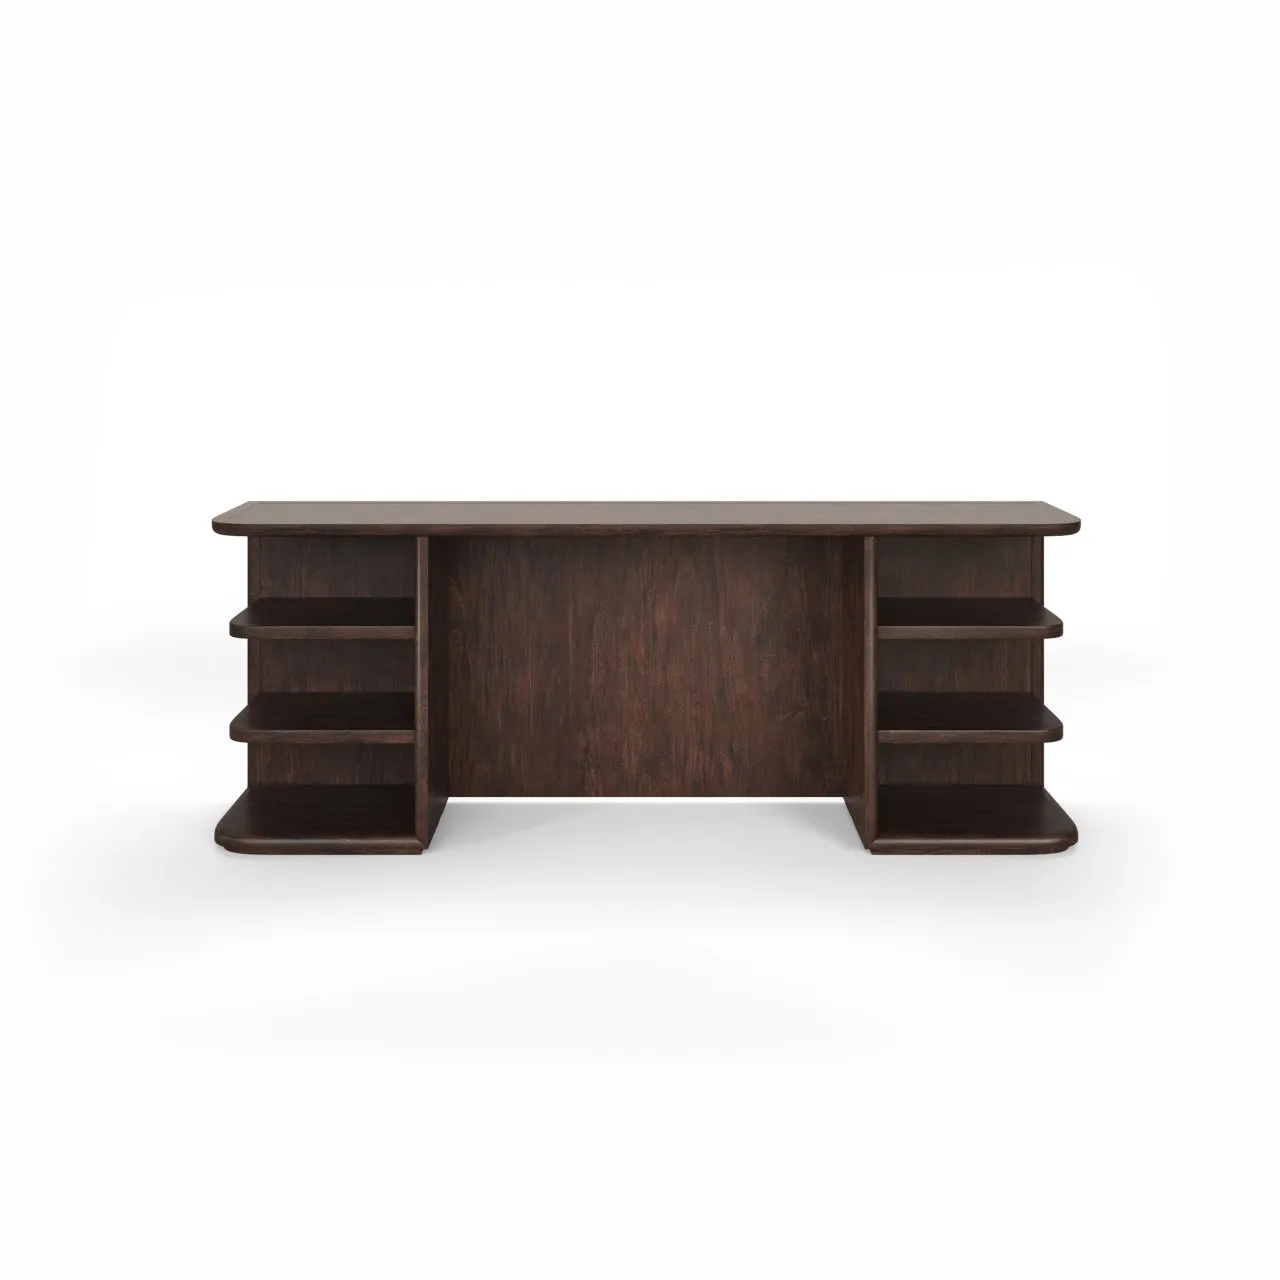 CANNELLO CONSOLE TABLE IN BRUNETTE (DARK BROWN WOOD FINISH)